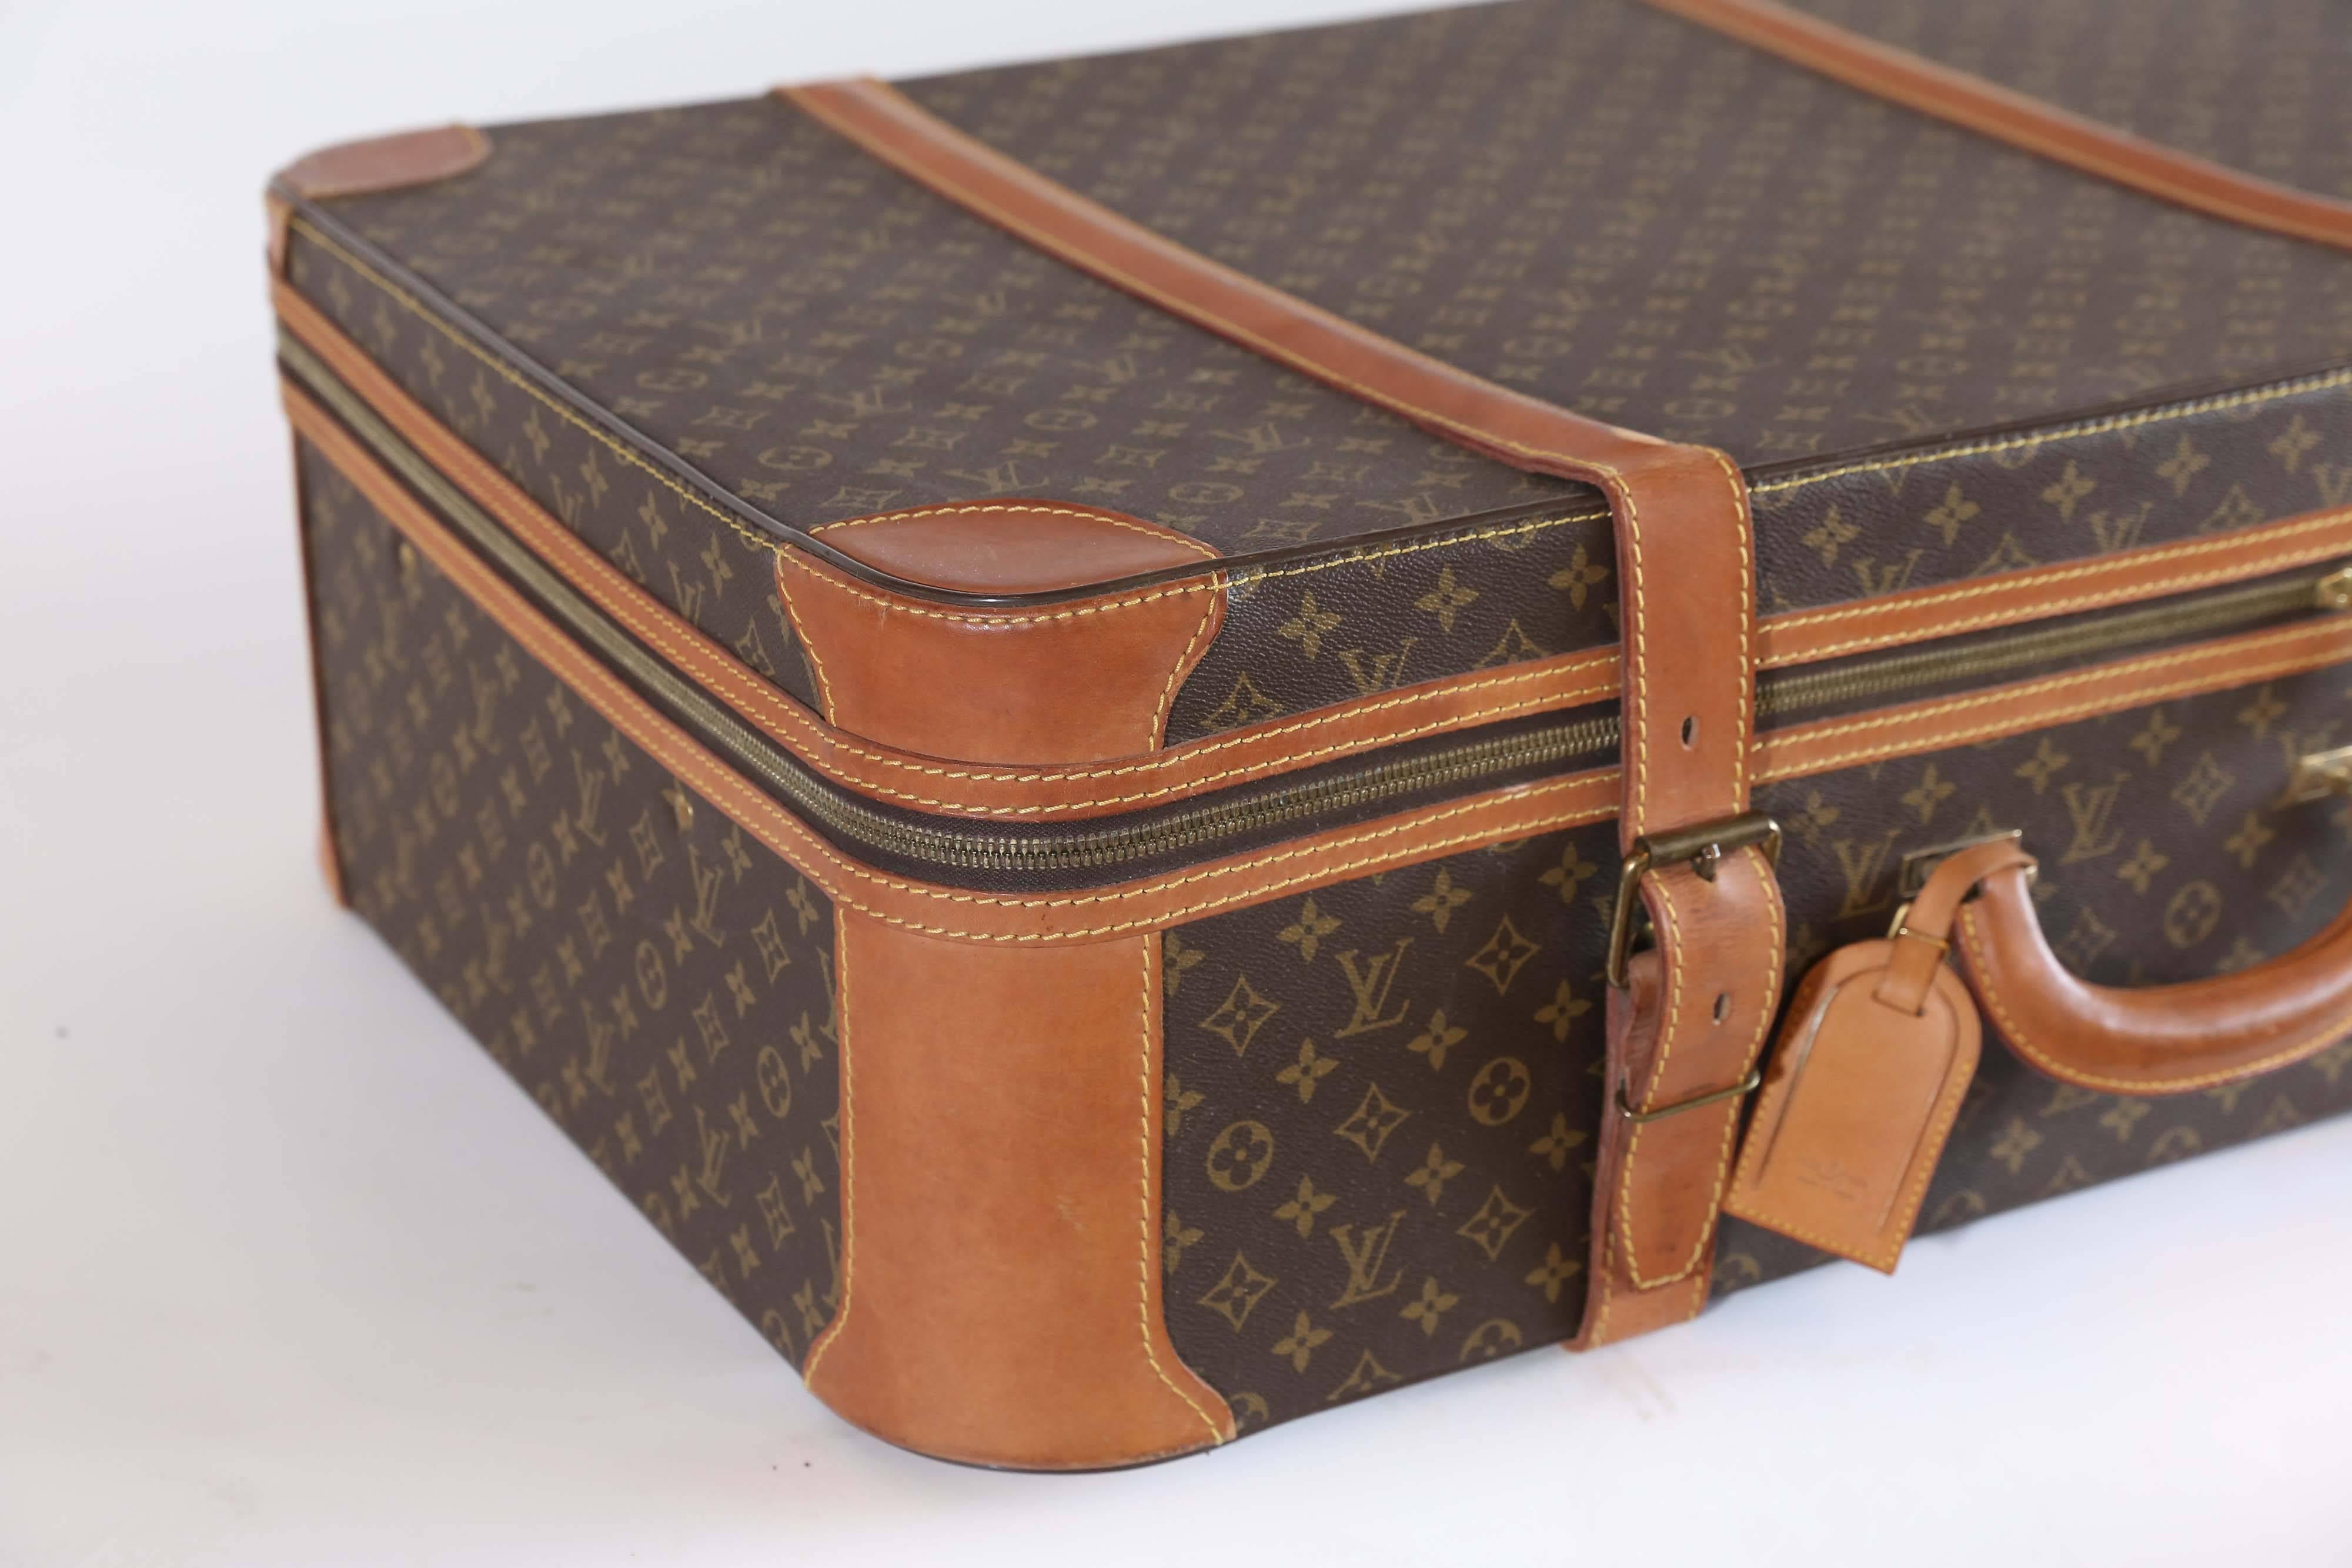 A well-loved vintage Louis Vuitton suitcase. Manufactured in April, 1985, this 32-year-old icon has wear consistent with age and thoughtful use. The leather has colored from handling but has only minor scuffing. The zipper works without snagging,